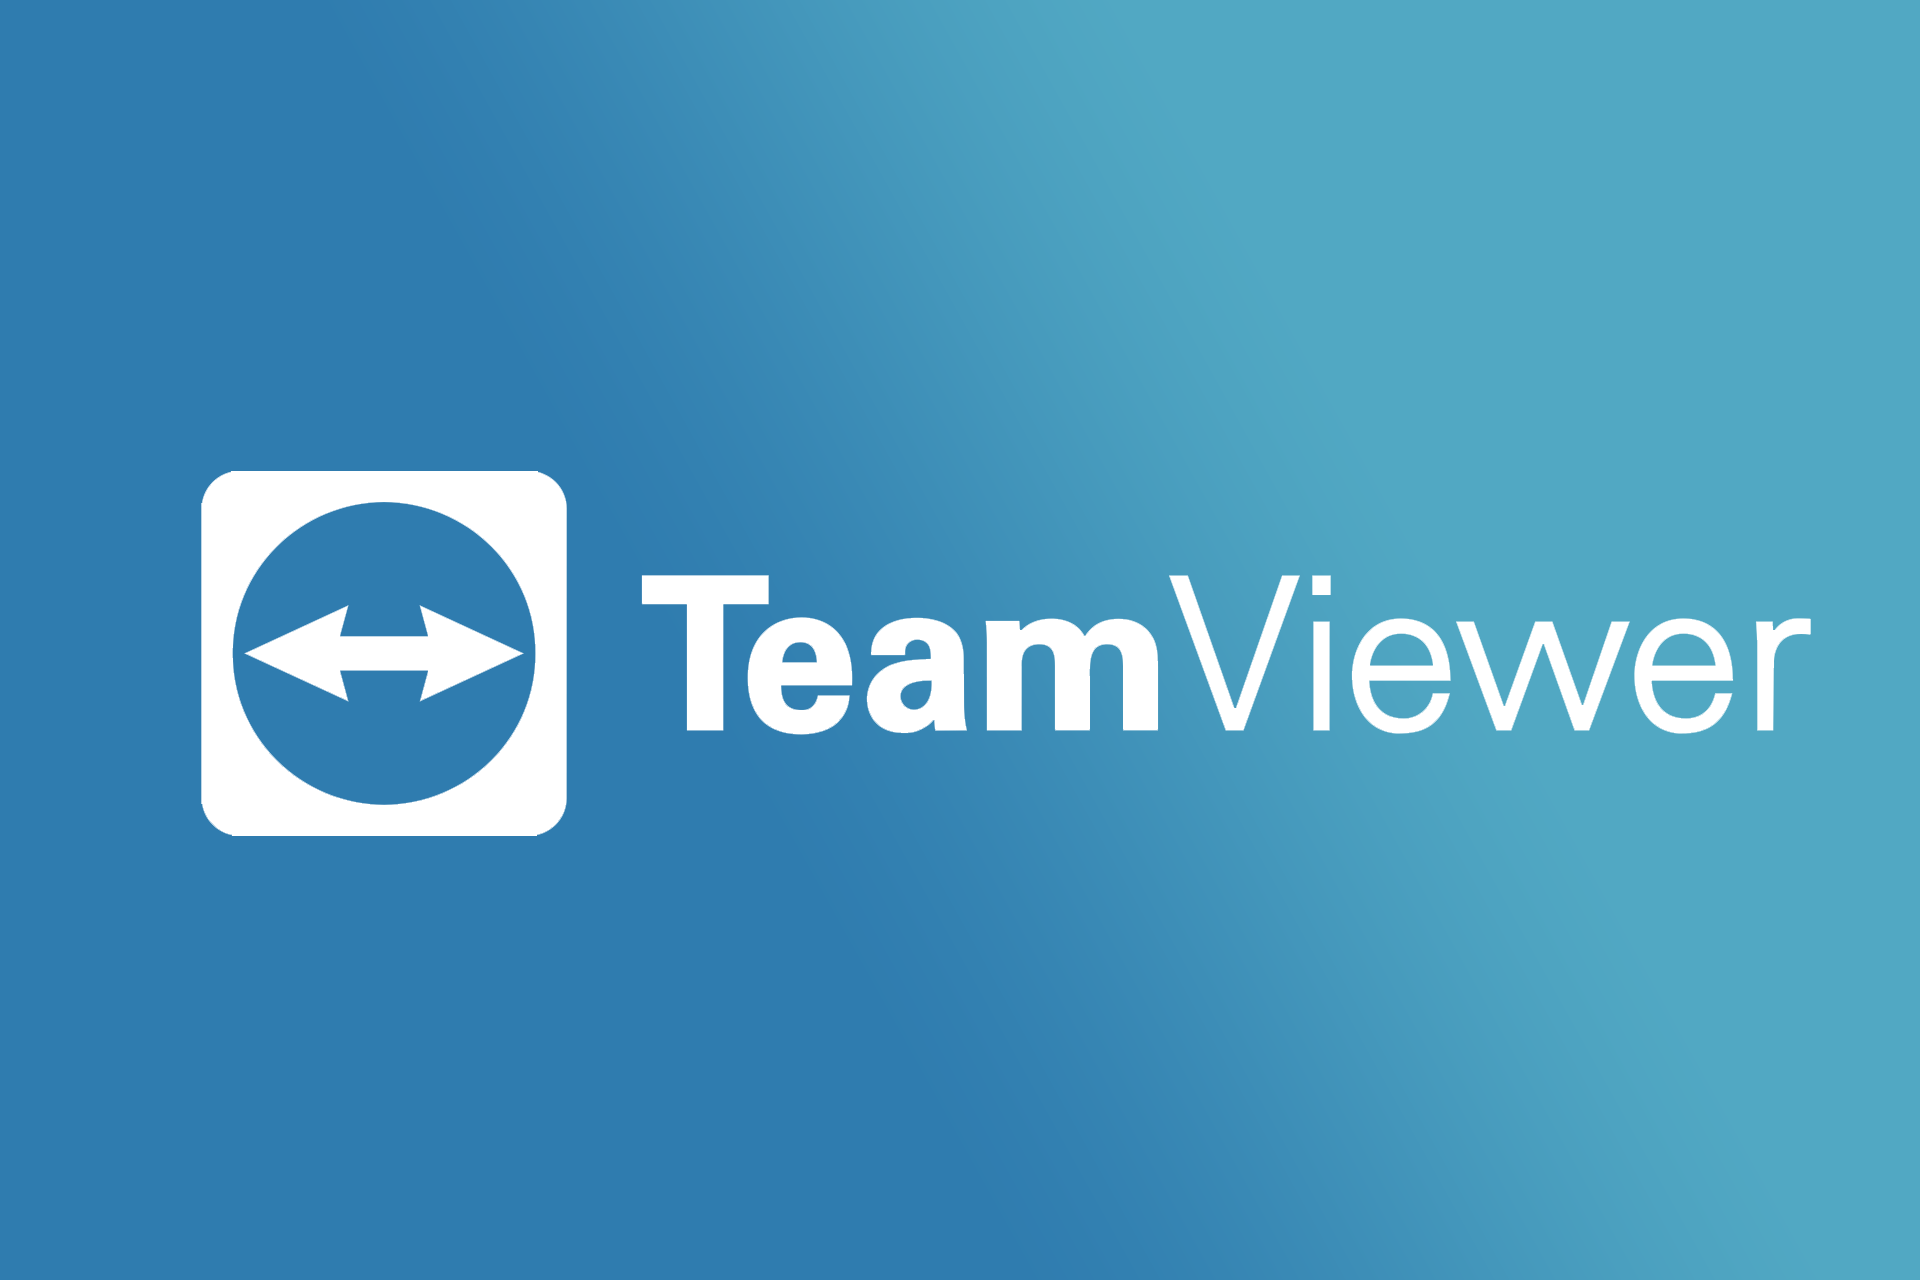 teamviewer free false commercial use